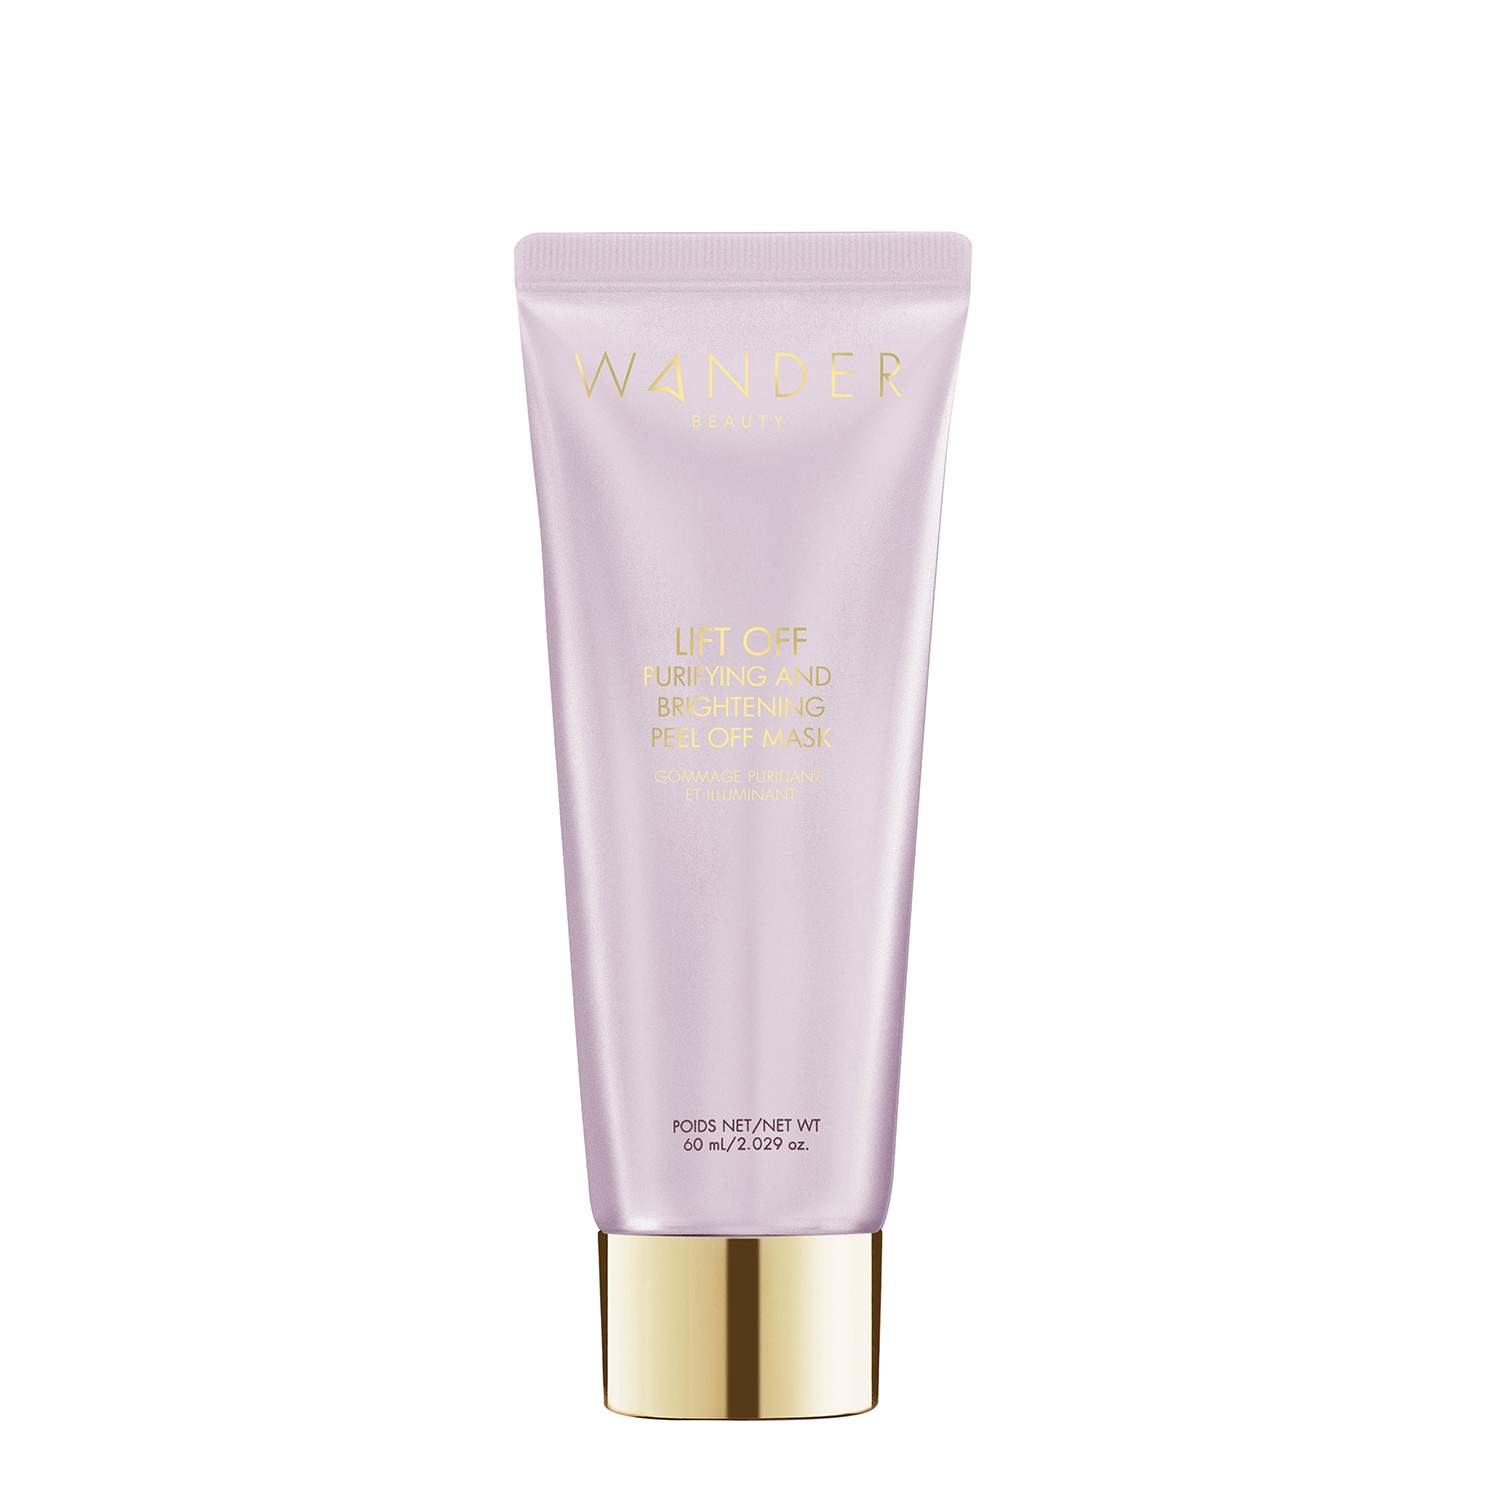 Wander Beauty Lift Off Rose Gold Purifying and Brightening Peel Off Mask